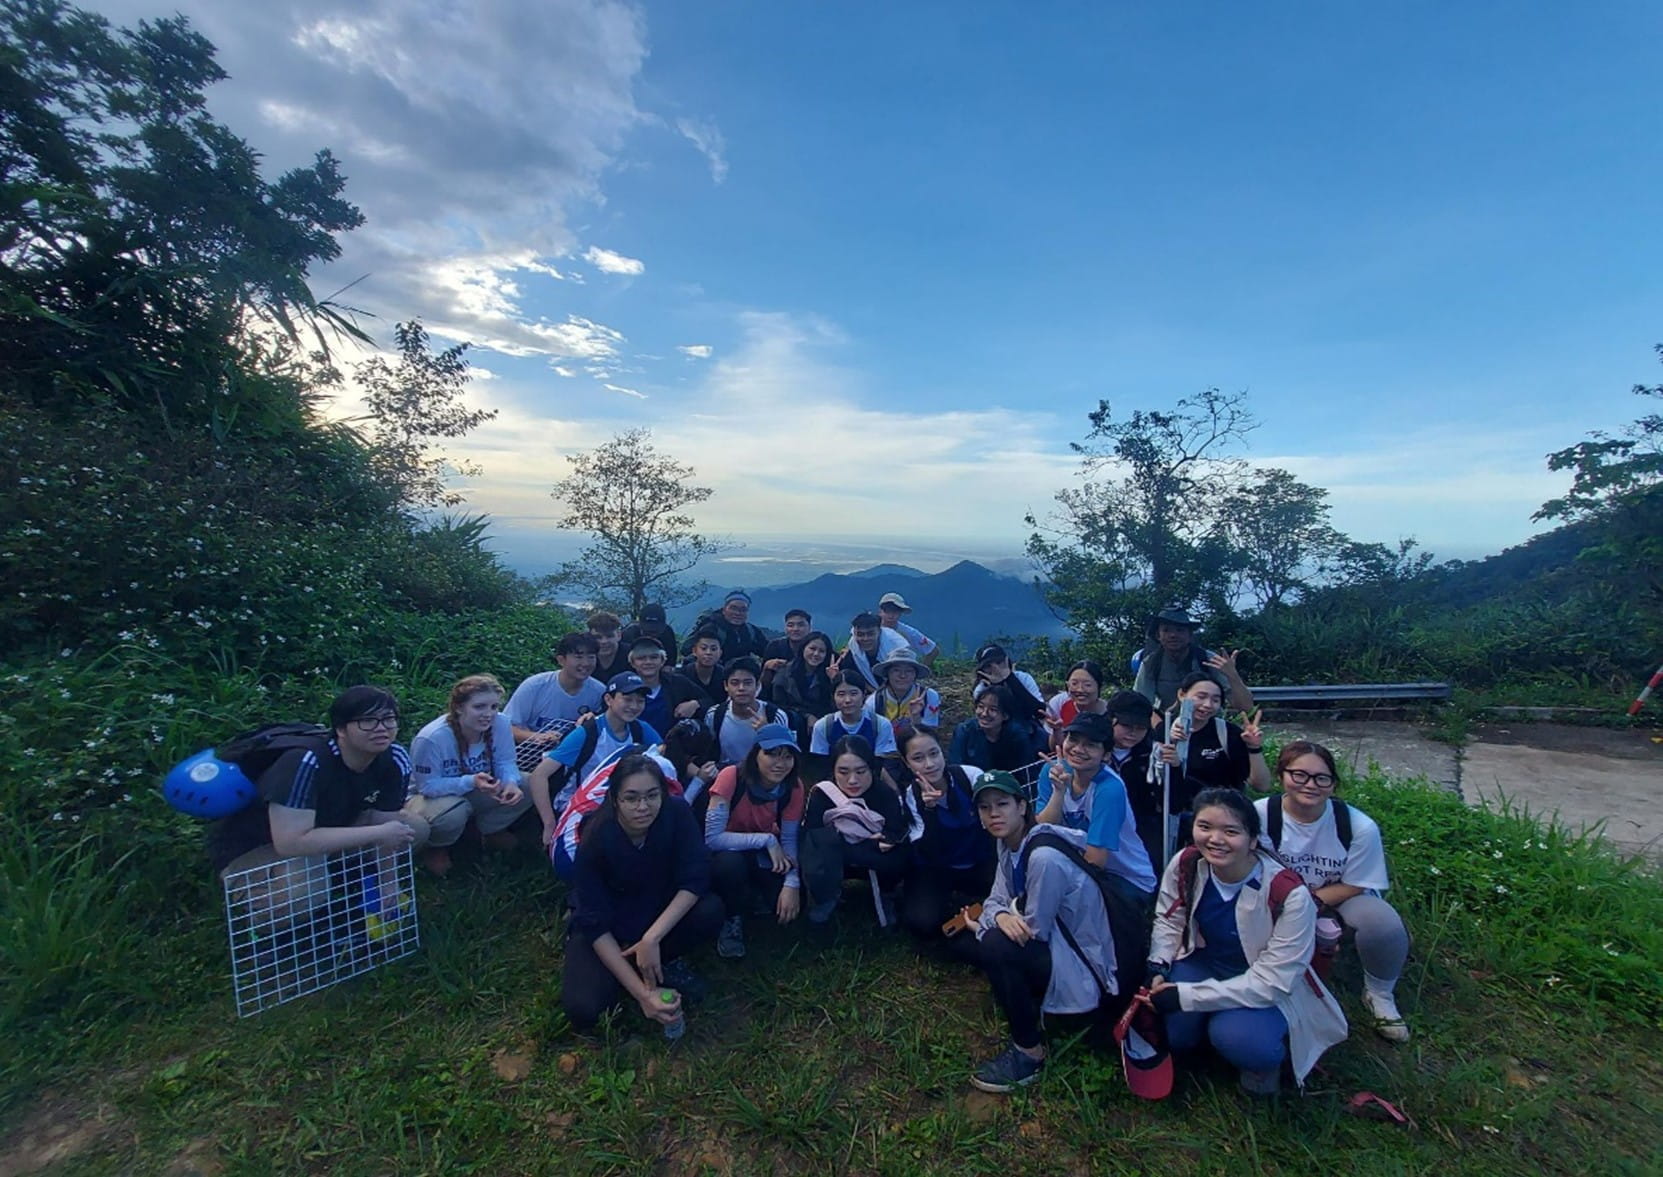 Year 13's Geographical and Scientific Journey at Bach Ma National Park | British International School Hanoi - Exploring the Wonders of Bach Ma National Park Year 13s Geographical and Scientific Journey